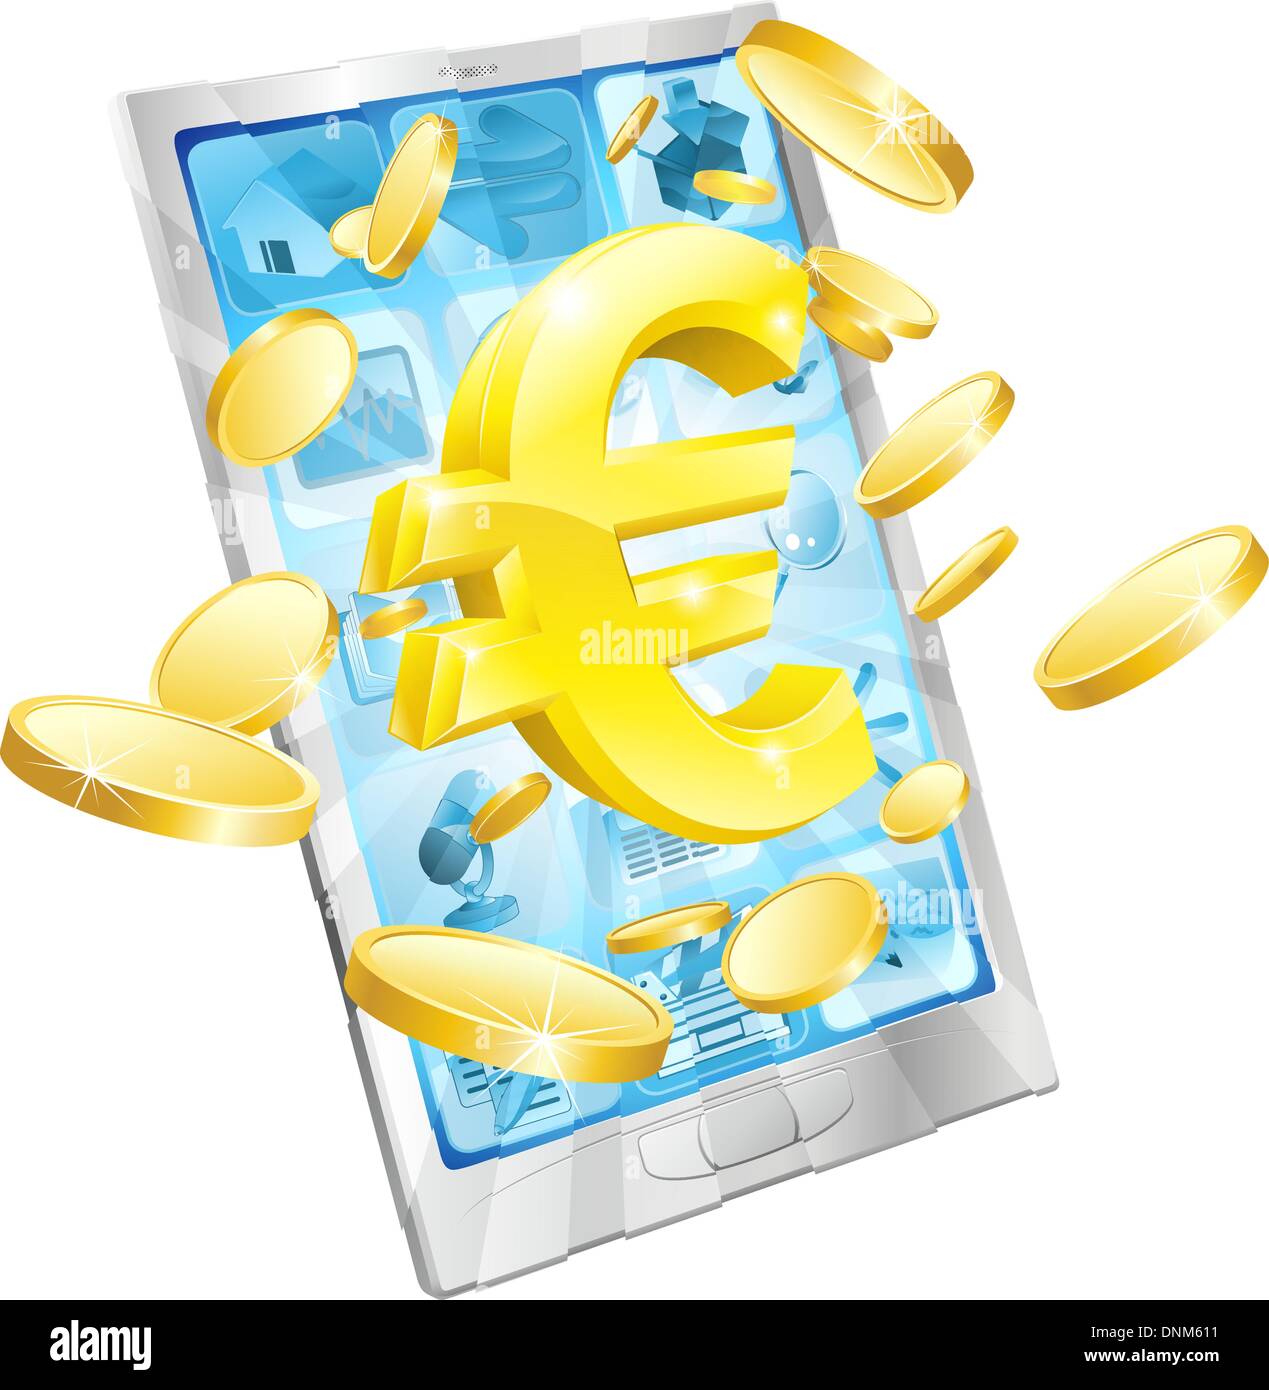 Euro money phone concept illustration of mobile cell phone with gold Euro sign and coins Stock Vector